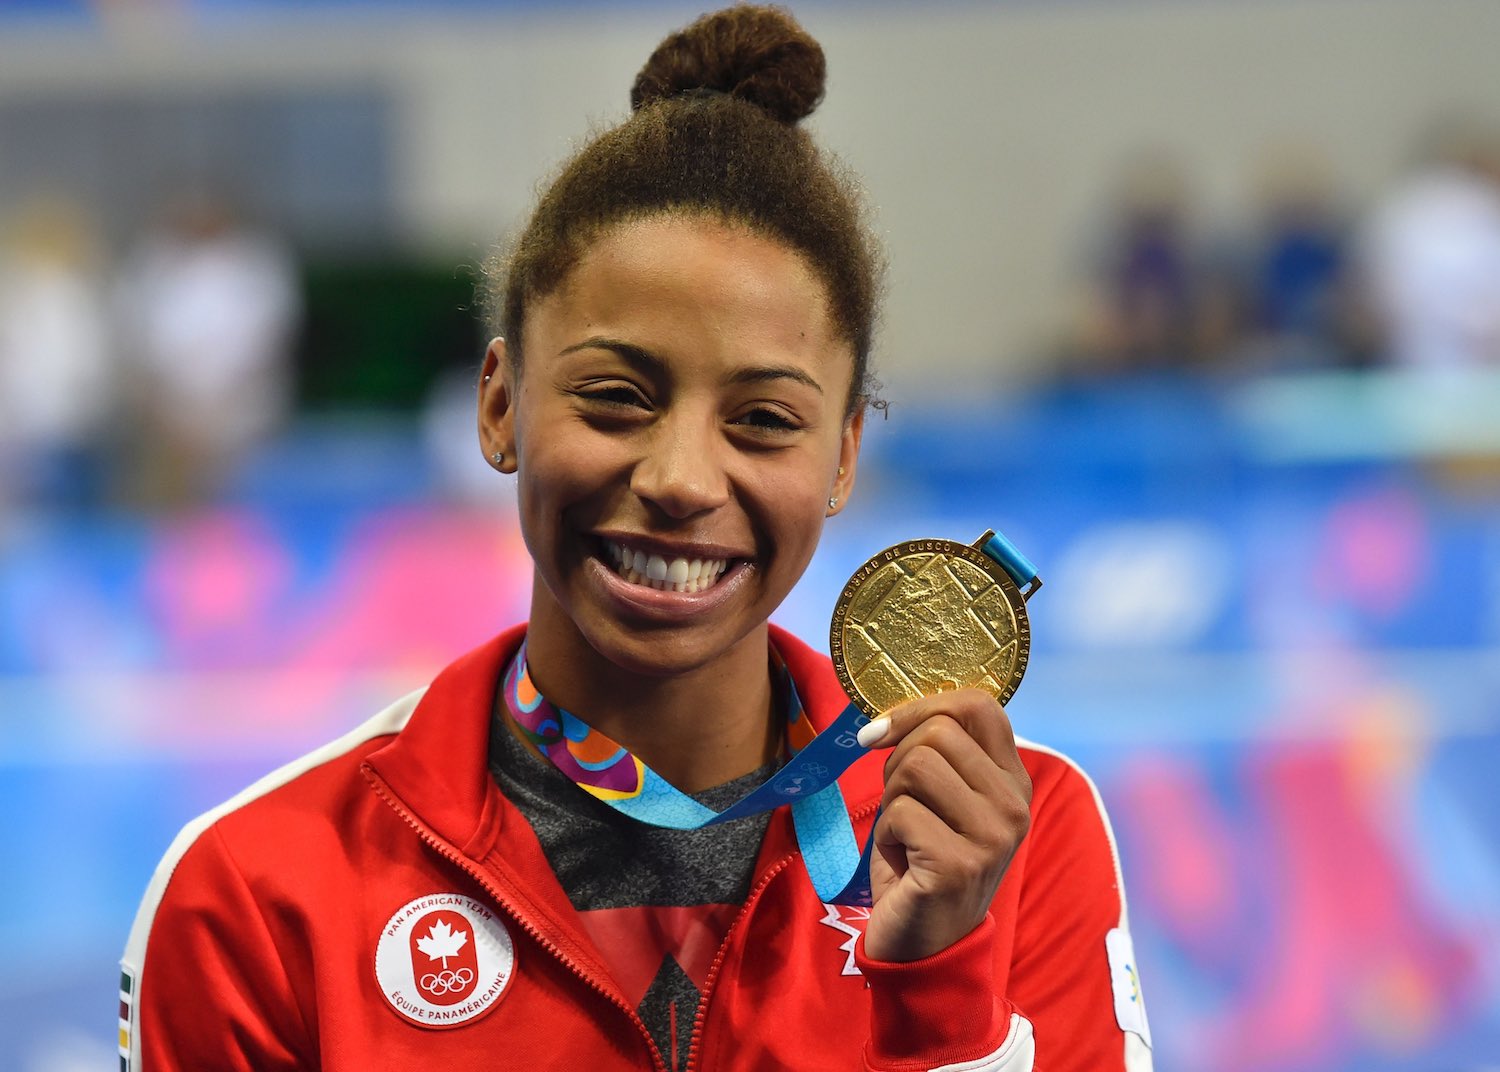 Canada's diver Jennifer Abel celebrates on the podium with her gold medal after winning the Diving Women's 3m Springboard Final of the Lima 2019 Pan-American Games at the Aquatic Centre in Lima on August 5, 2019. (Photo by Pedro PARDO / AFP)        (Photo credit should read PEDRO PARDO/AFP via Getty Images)